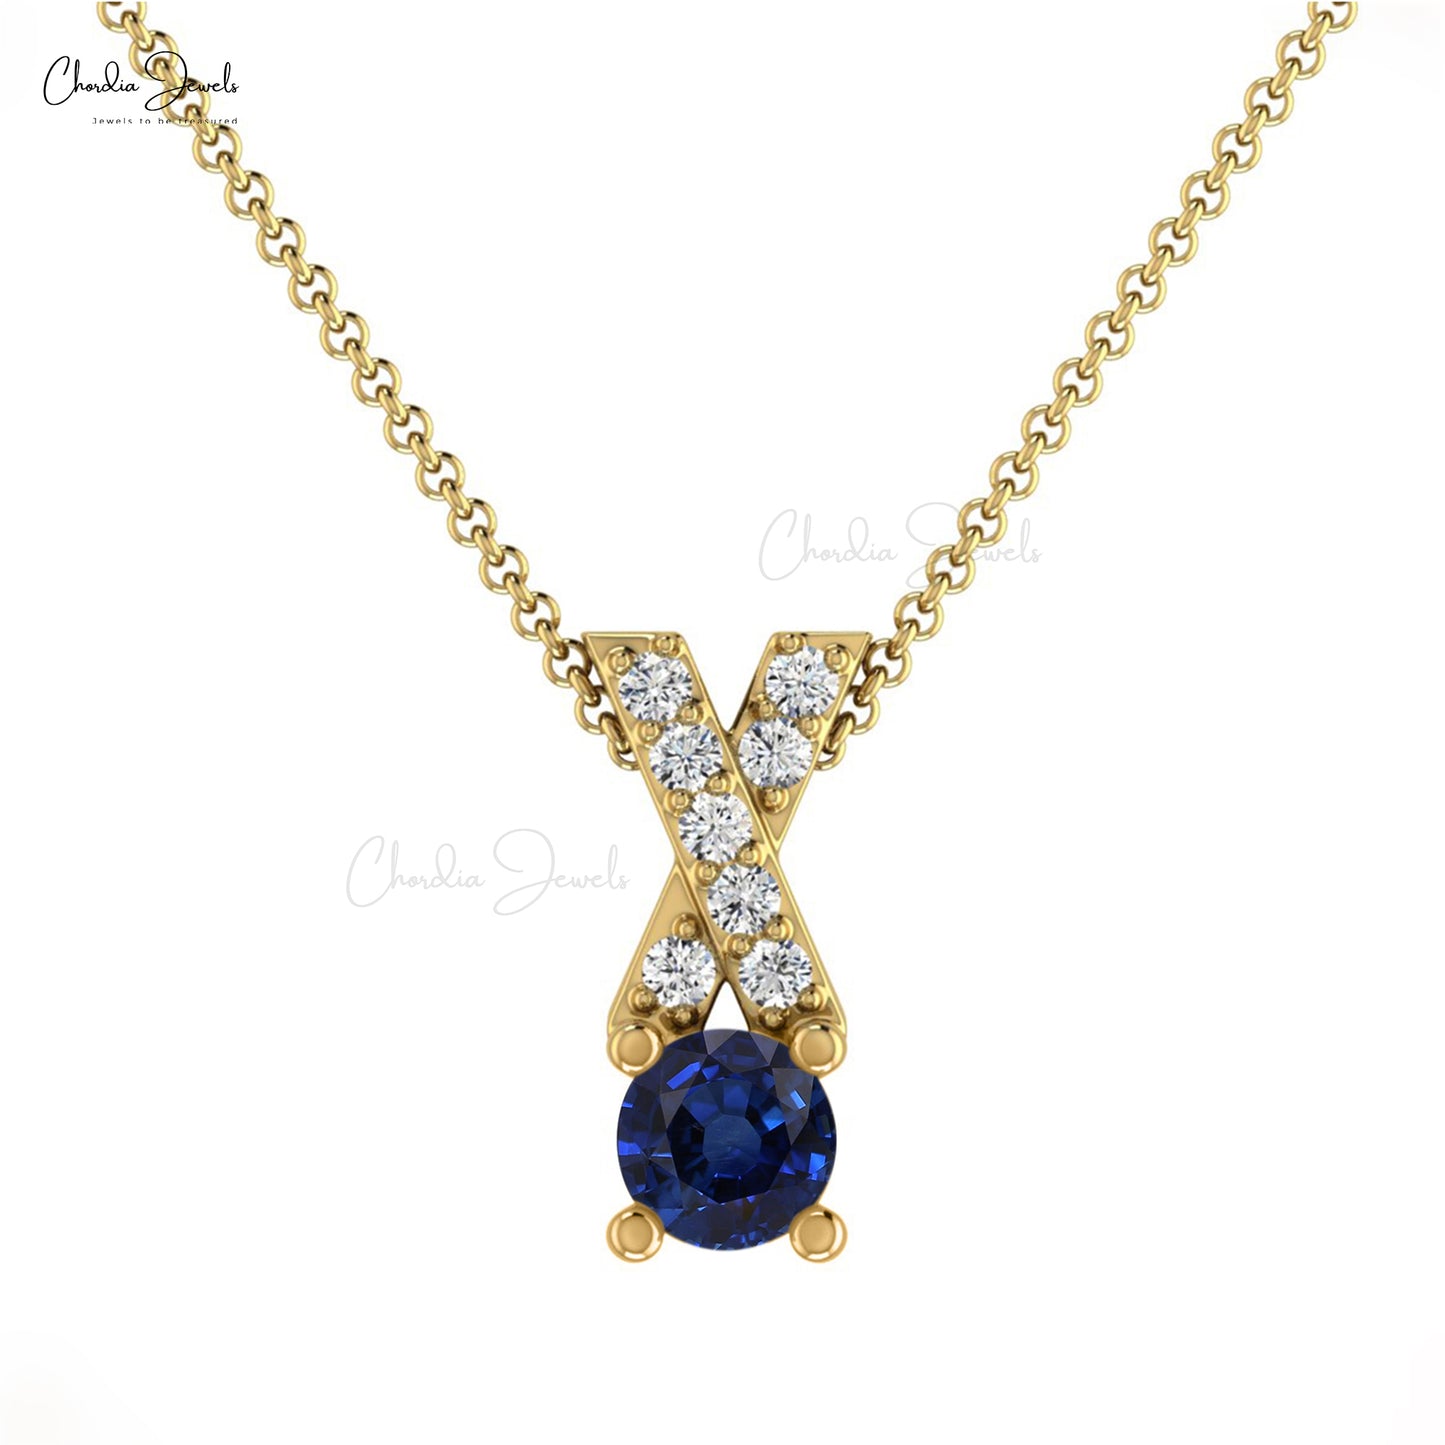 Load image into Gallery viewer, Natural Blue Sapphire Criss Cross Pendant 14k Solid Gold Diamond Pendant 0.45 Carat Round Cut Handmade Gemstone Pendant For Birthday Gift
